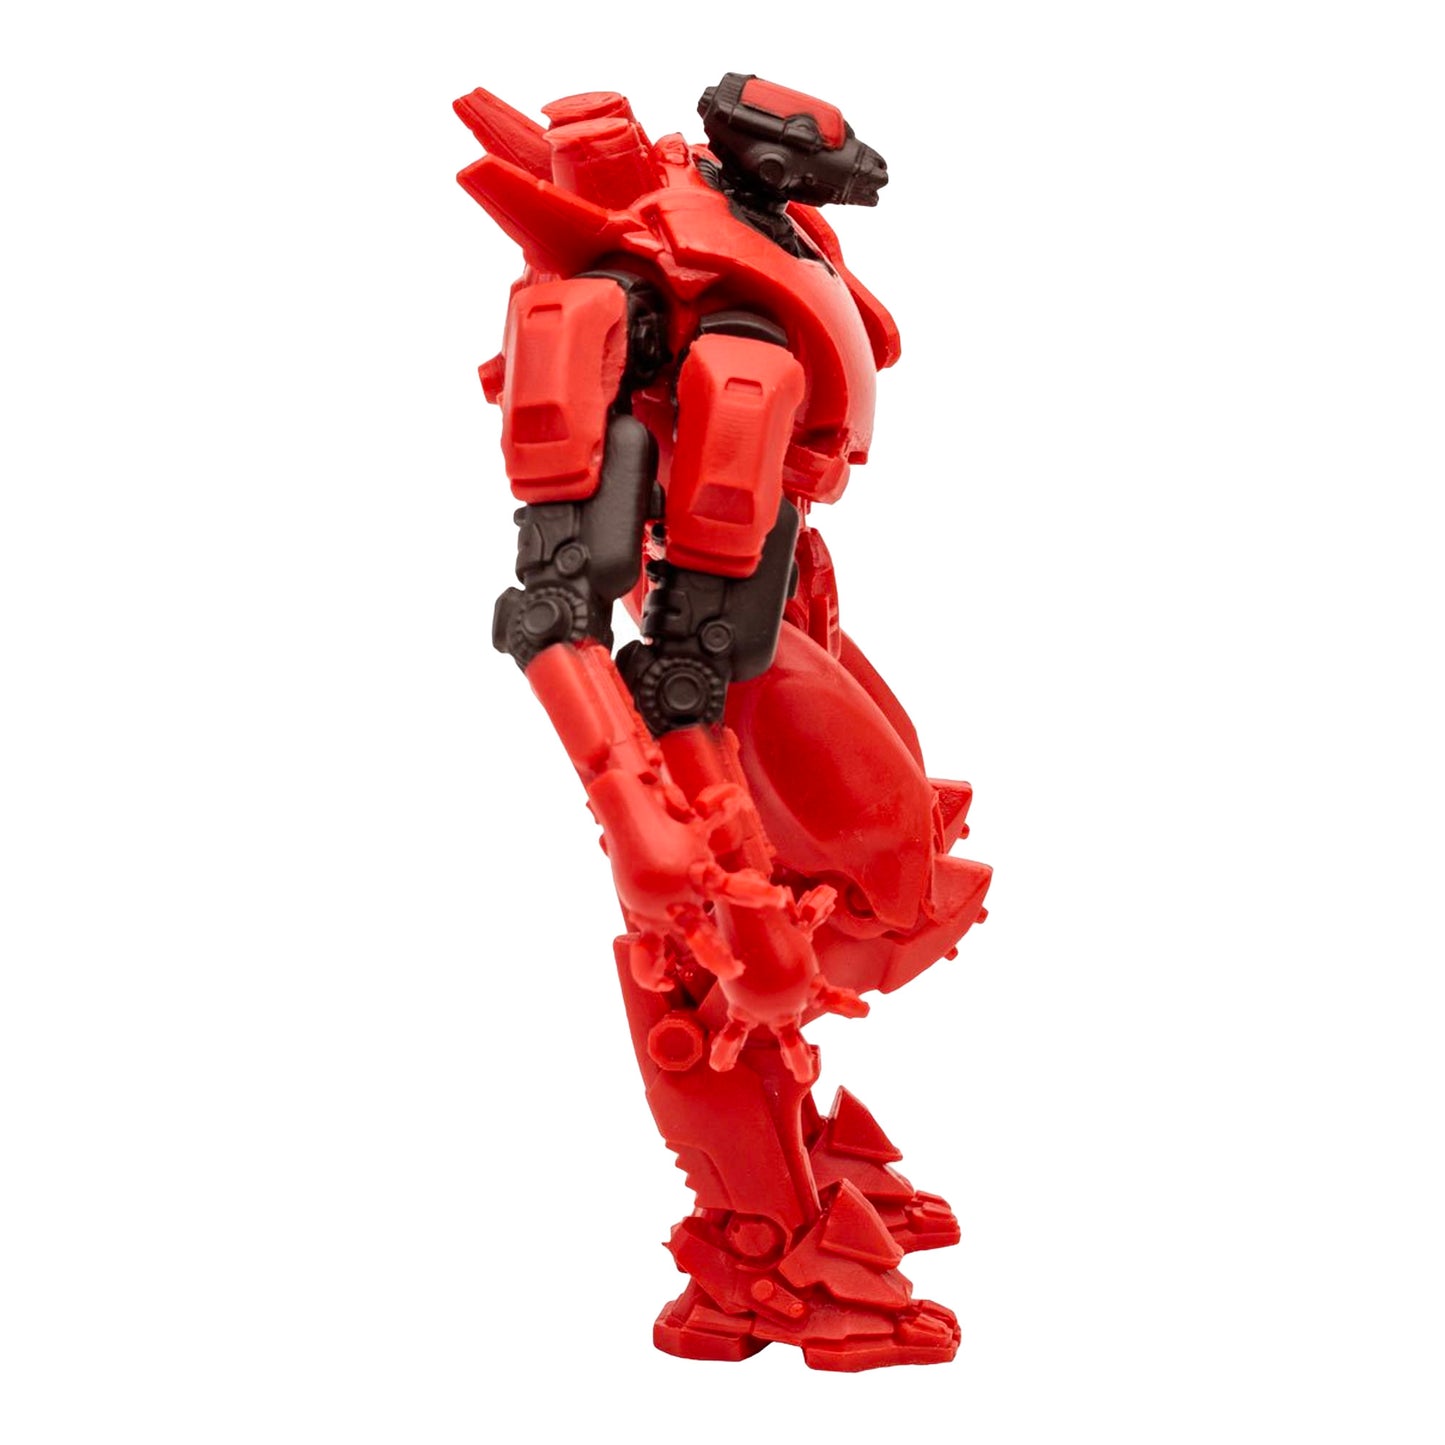 McFarlane Toys: Pacific Rim - Jaeger Wave 1 Crimson Typhoon 4" Tall Action Figure with Comic Book